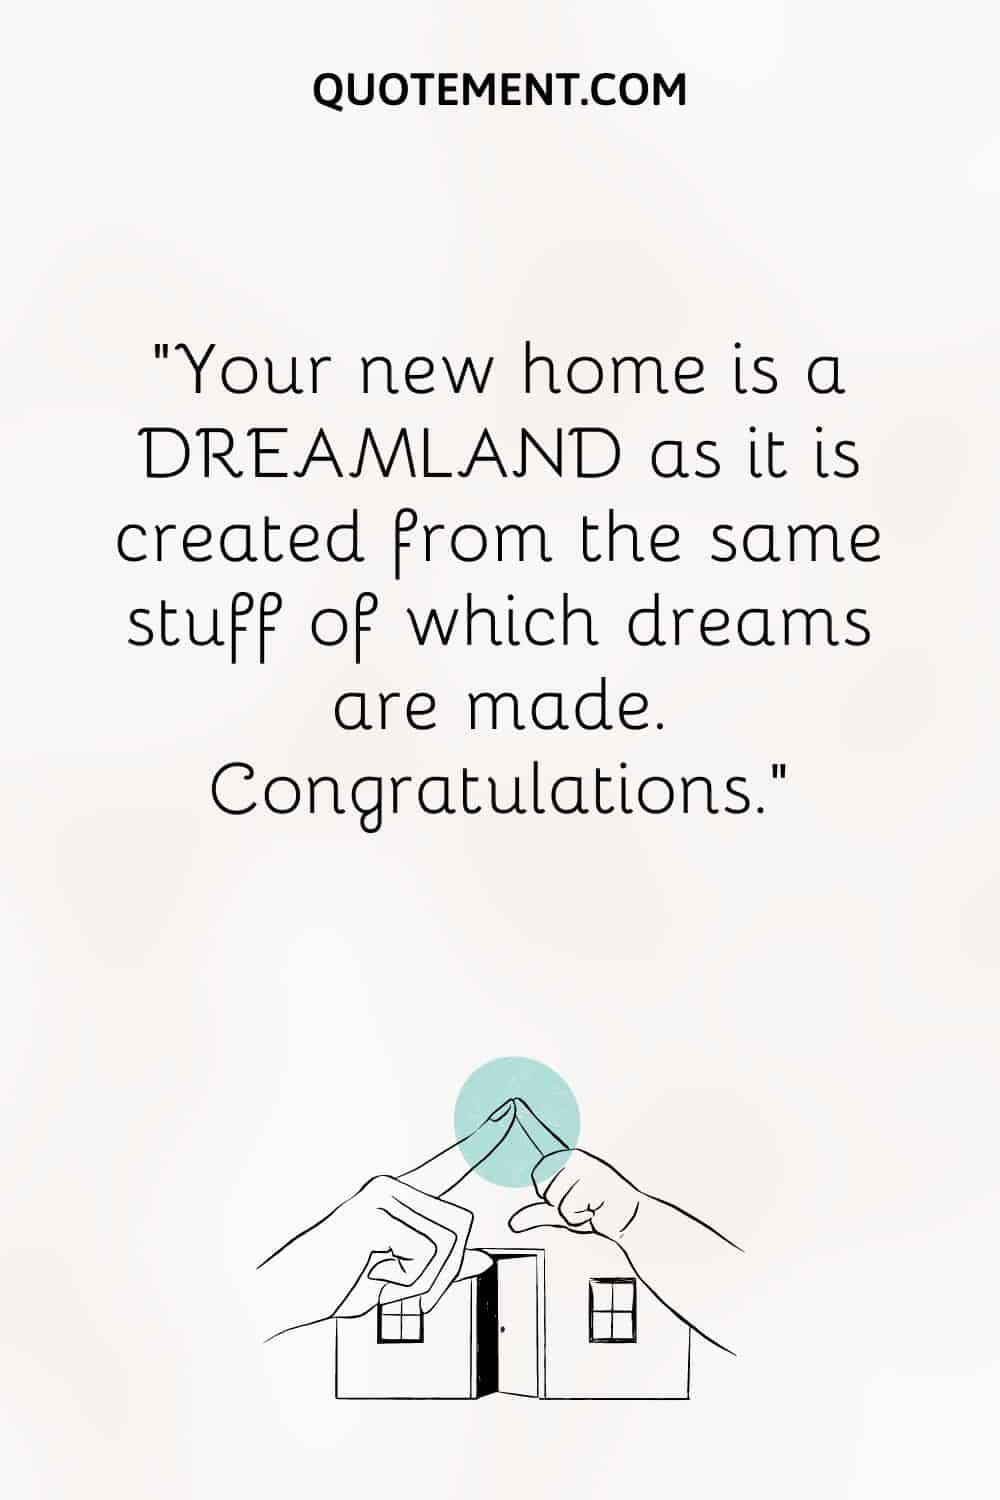 Your new home is a DREAMLAND